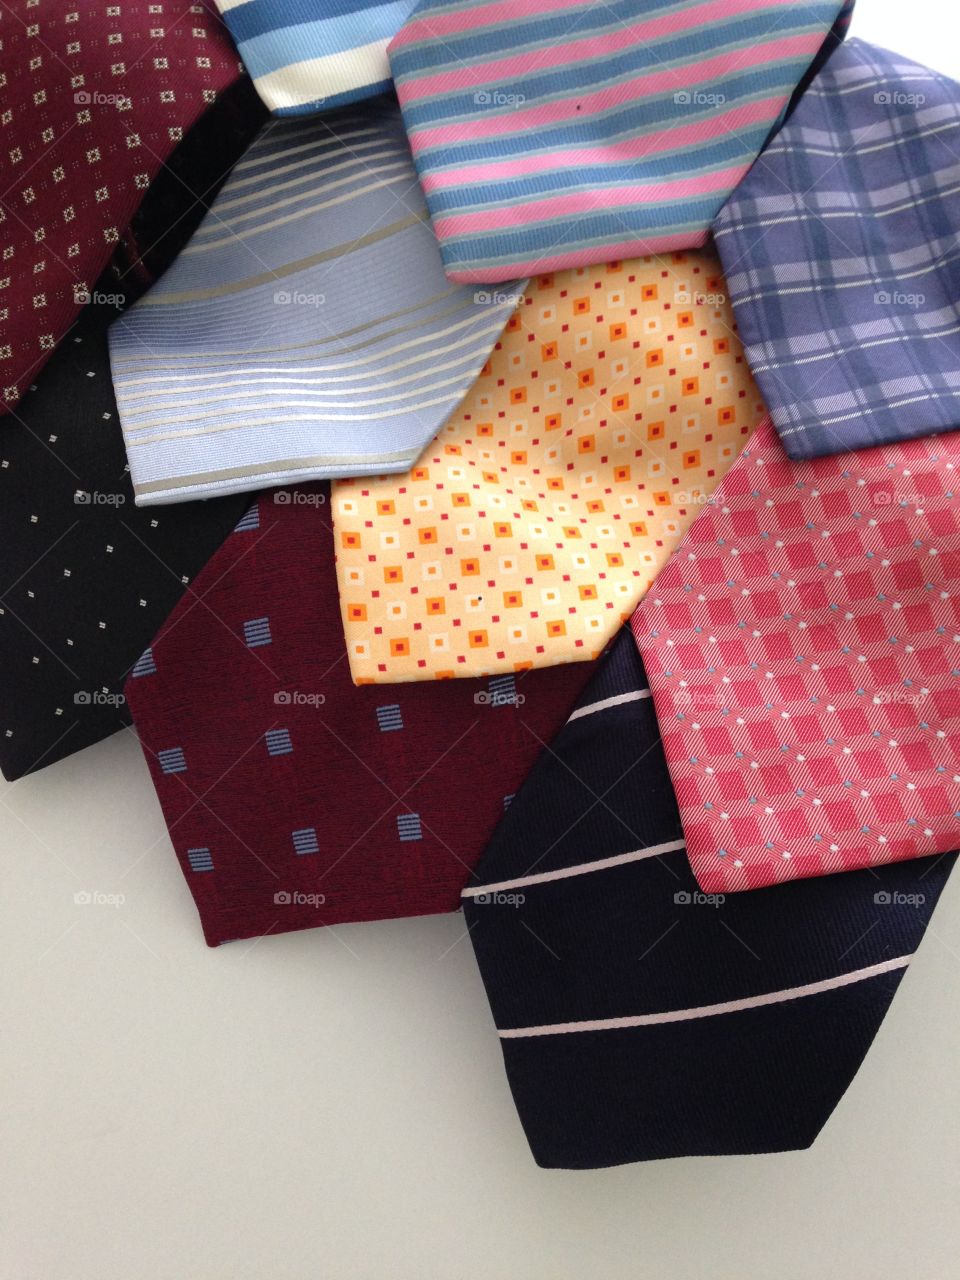 Close-up of a variety of tie